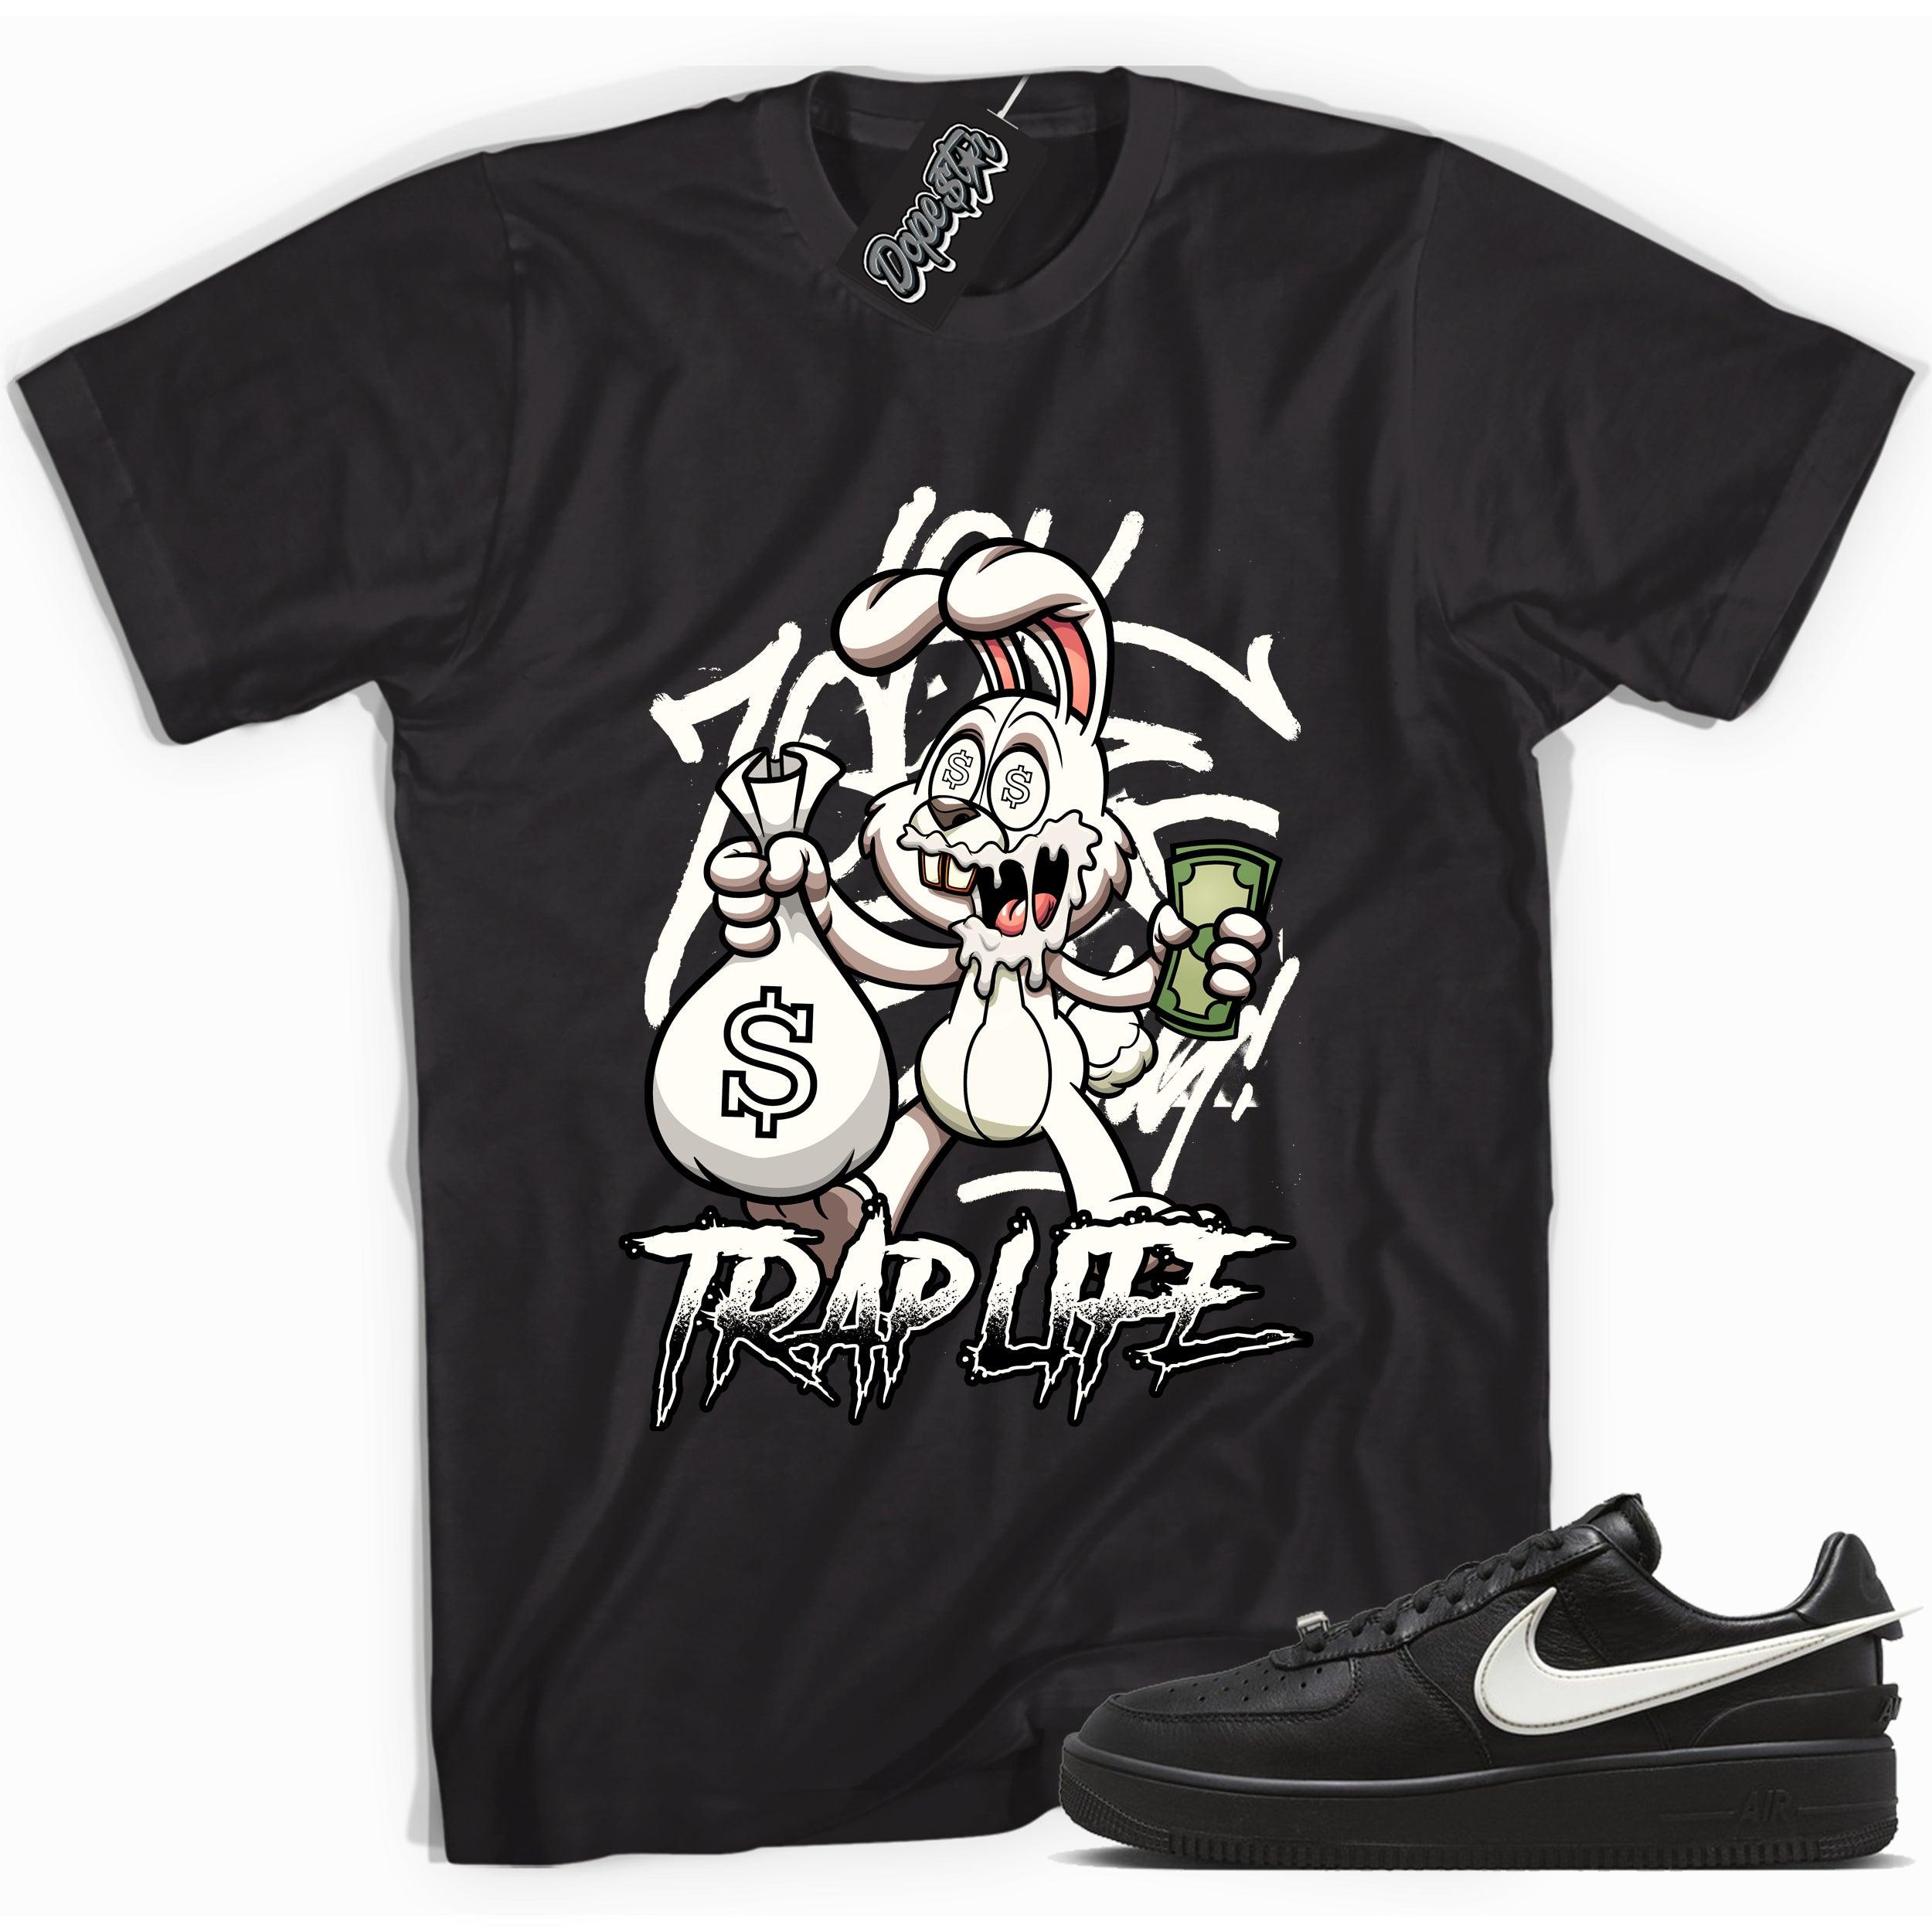 Cool black graphic tee with 'trap rabbit' print, that perfectly matches Nike Air Force 1 Low SP Ambush Phantom sneakers.